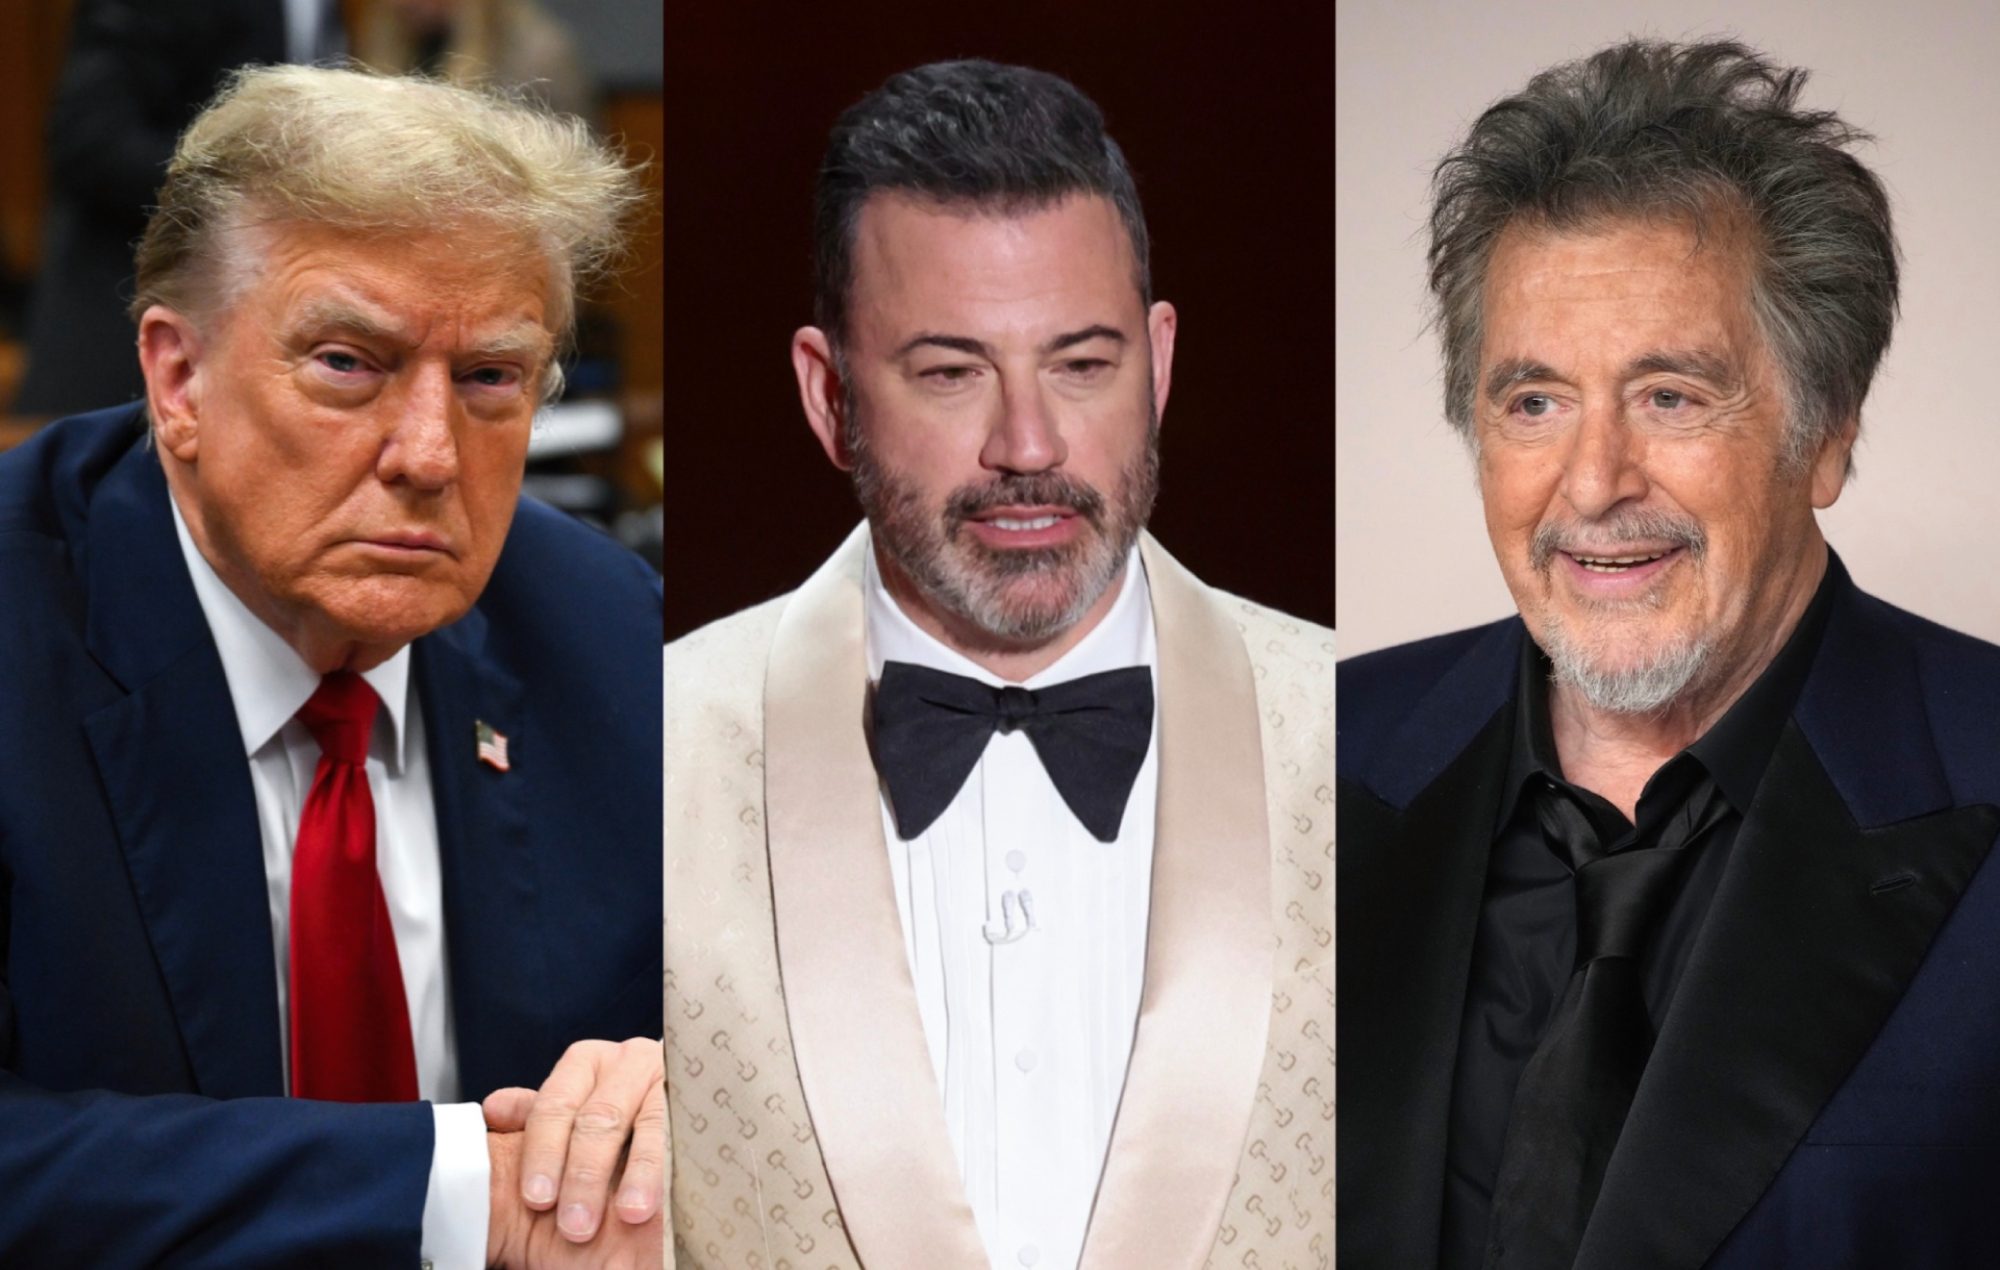 Donald Trump mixes up Jimmy Kimmel and Al Pacino in weird rant